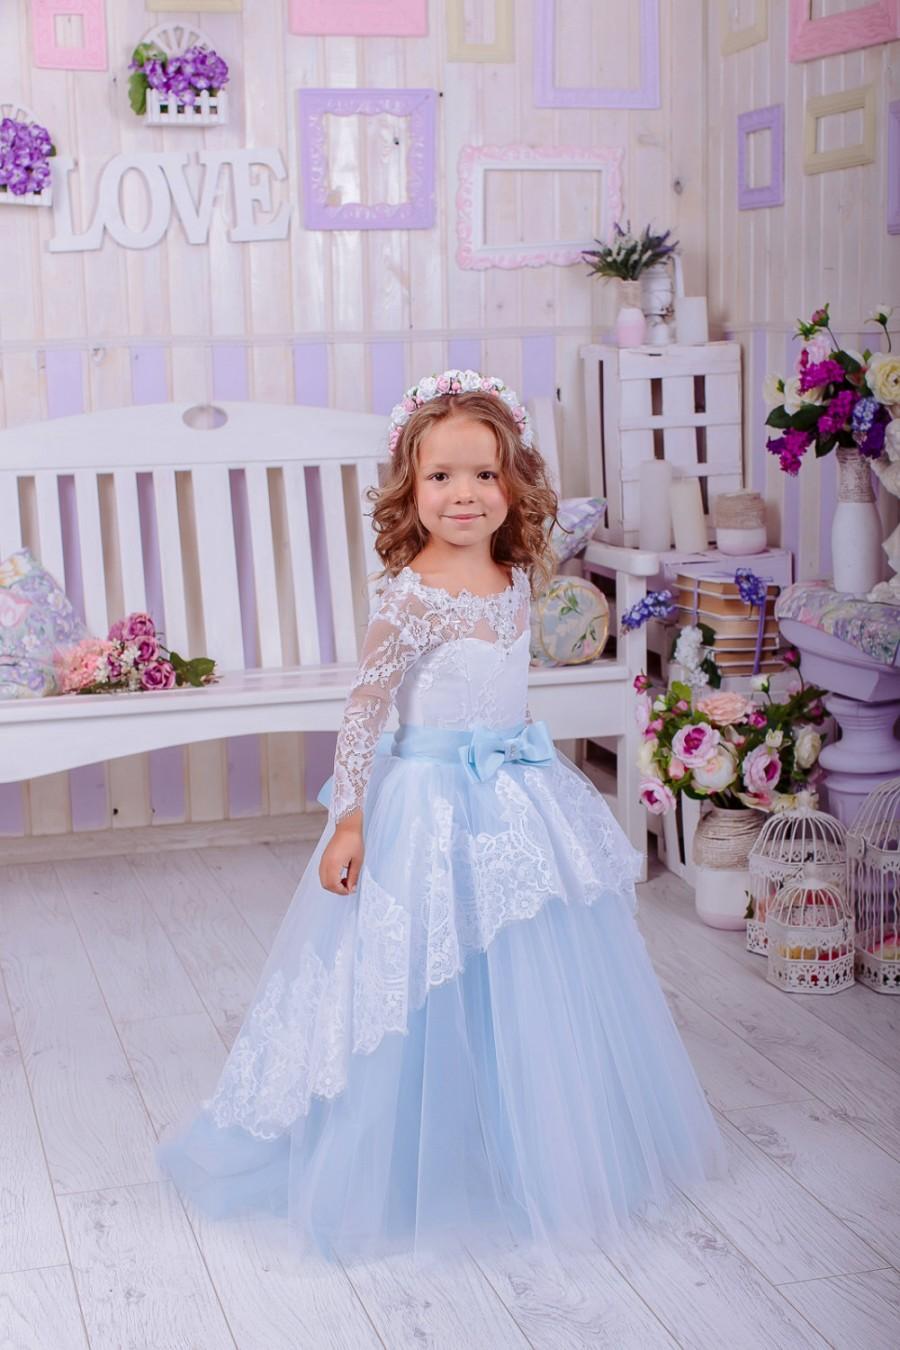 Mariage - Baby Blue Lace Flower Girl Dress,Flower Girl Dress,Wedding Party Dress,Baby Dress, Rustic Girl Dress, Girls Dresses,Ivory Flower Girl Dress